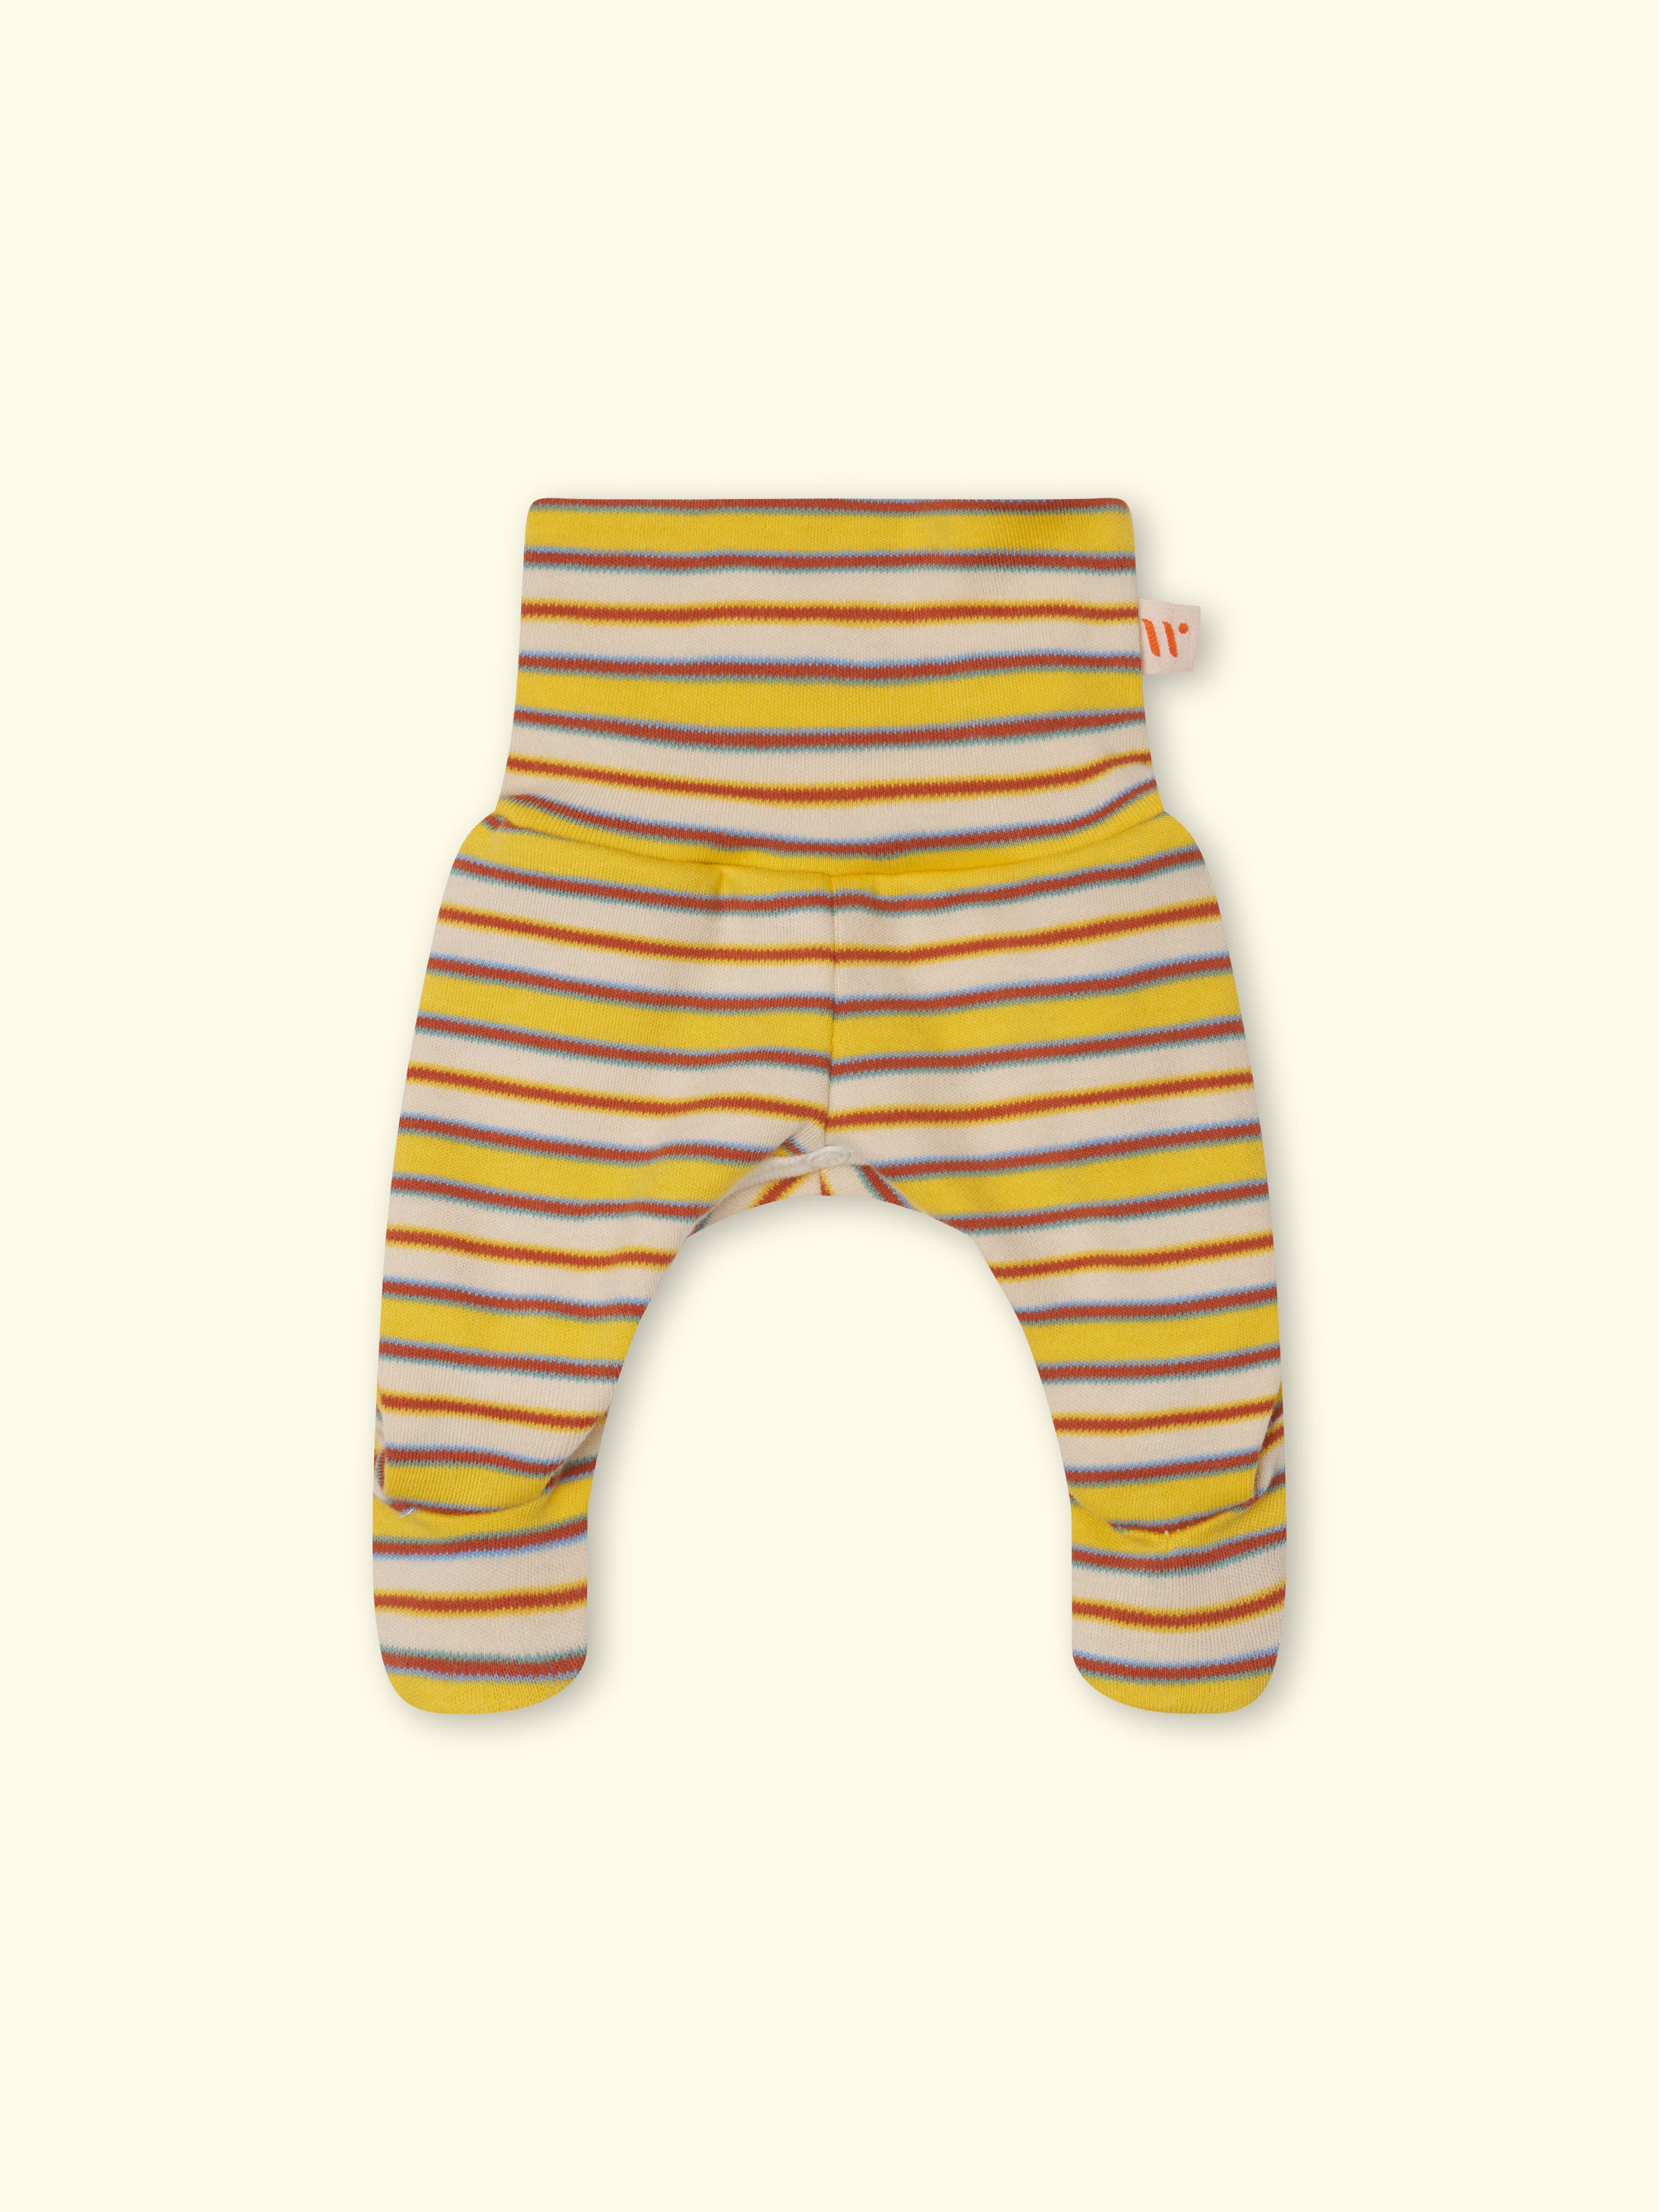 NEW - Premature baby pants Momo - made of jersey with press studs